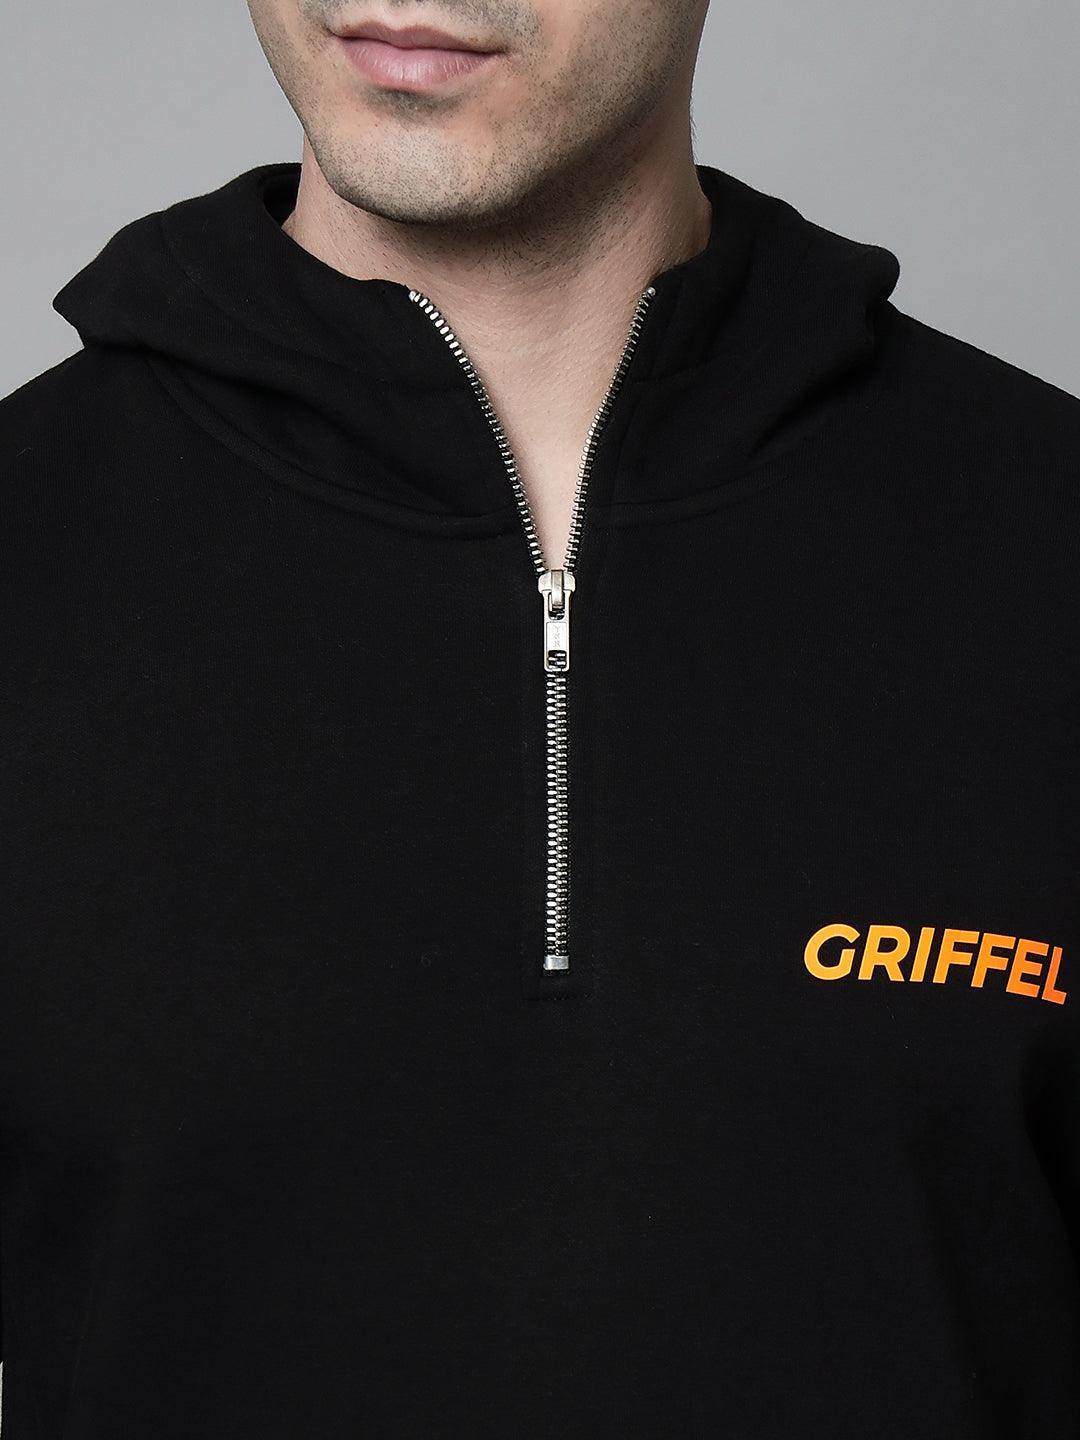 Griffel Men's Cotton Fleece Colorblocked Sweatshirt with Long Sleeve and Front Logo Print - griffel